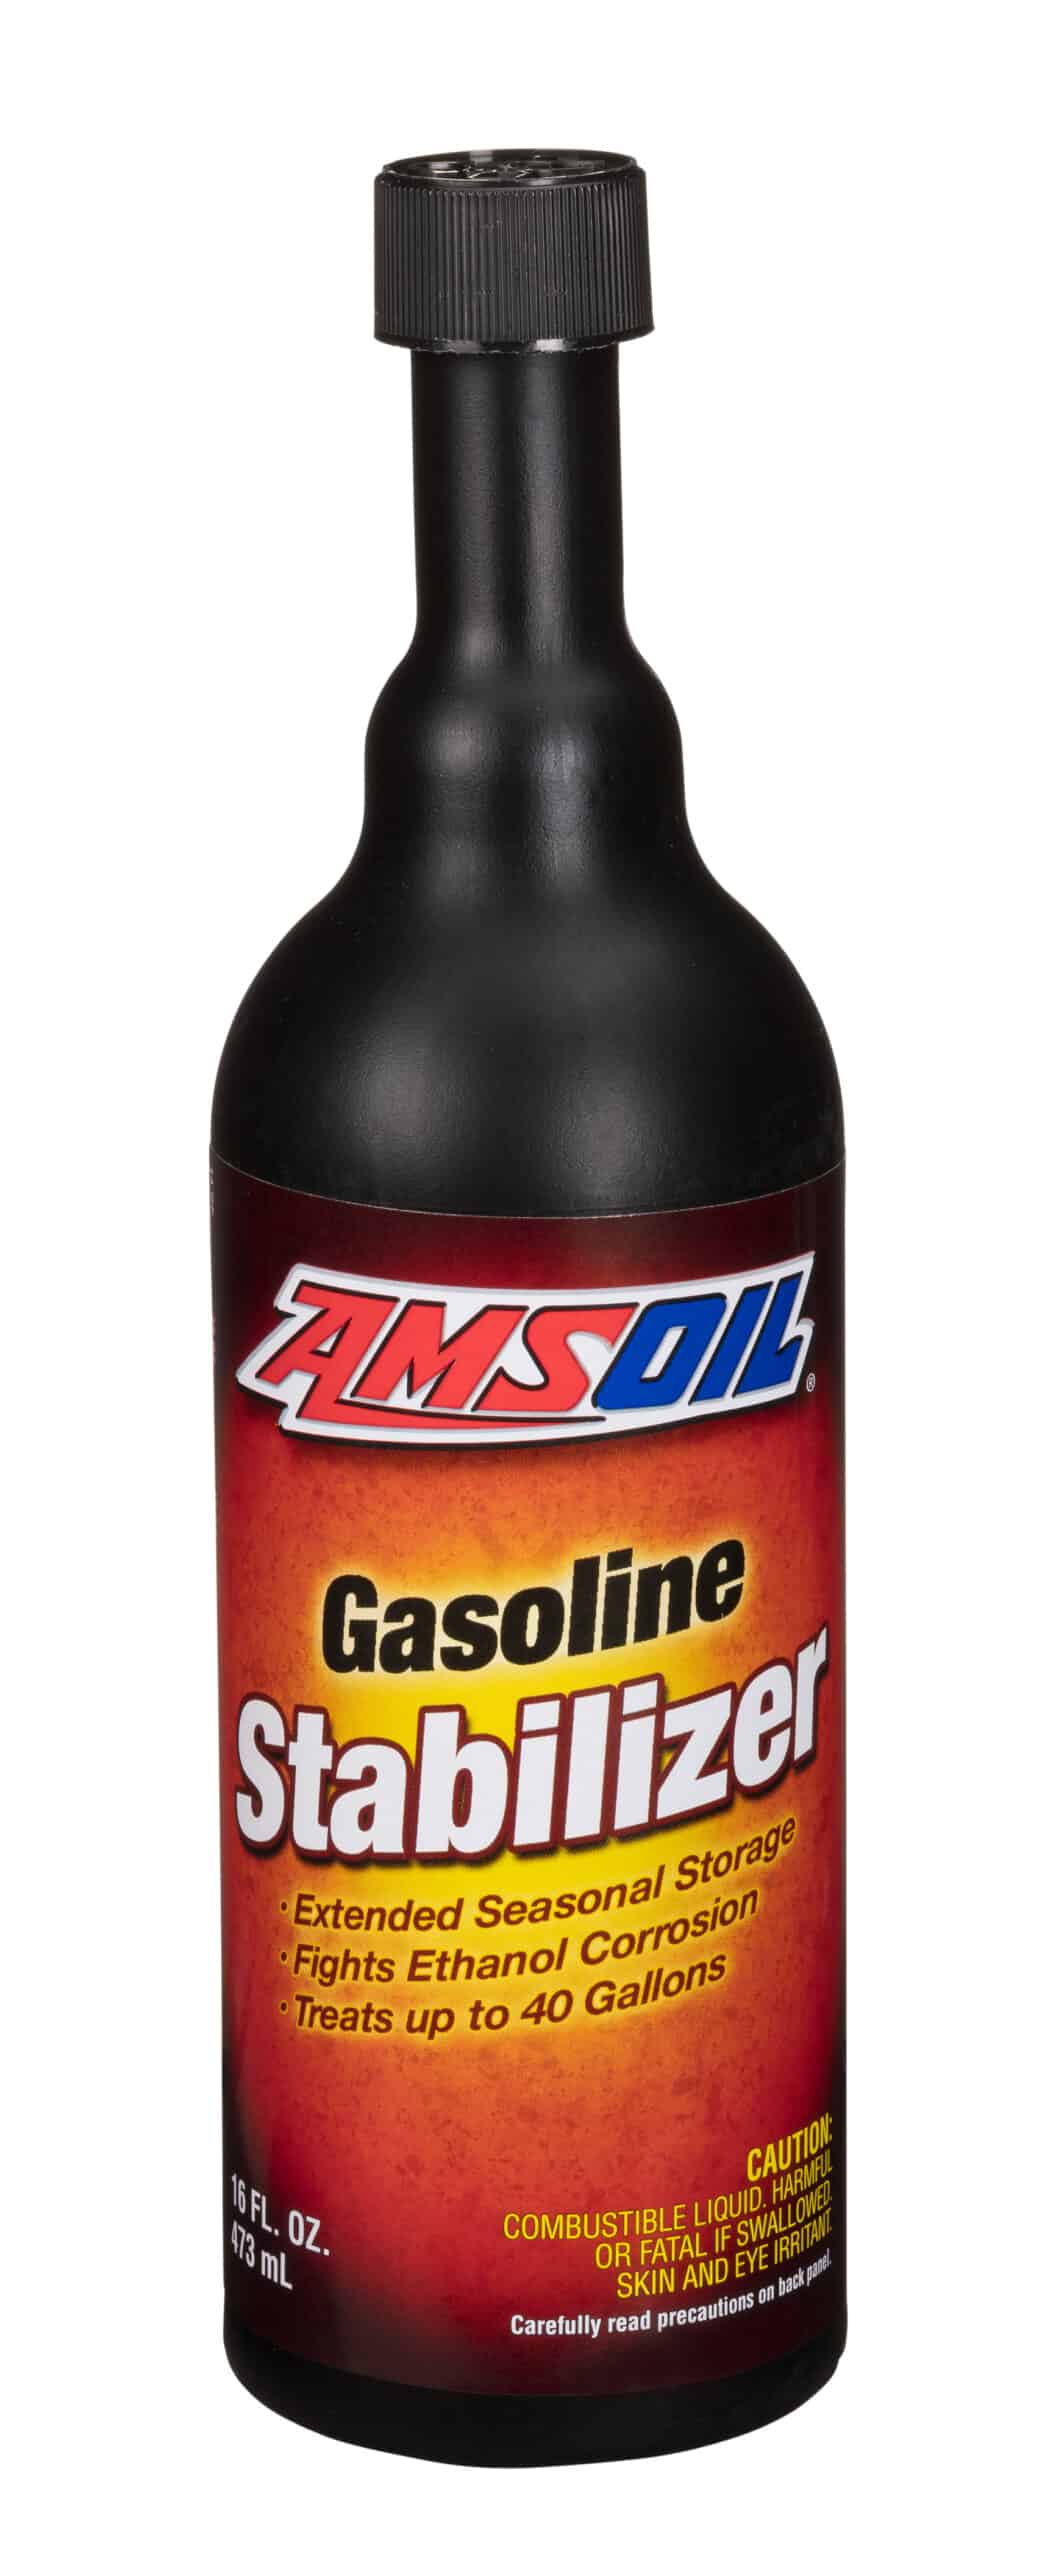 A bottle of AMSOIL Gasoline Stabilizer, which improves performance, helps extend equipment life, and decreases maintenance expenses.